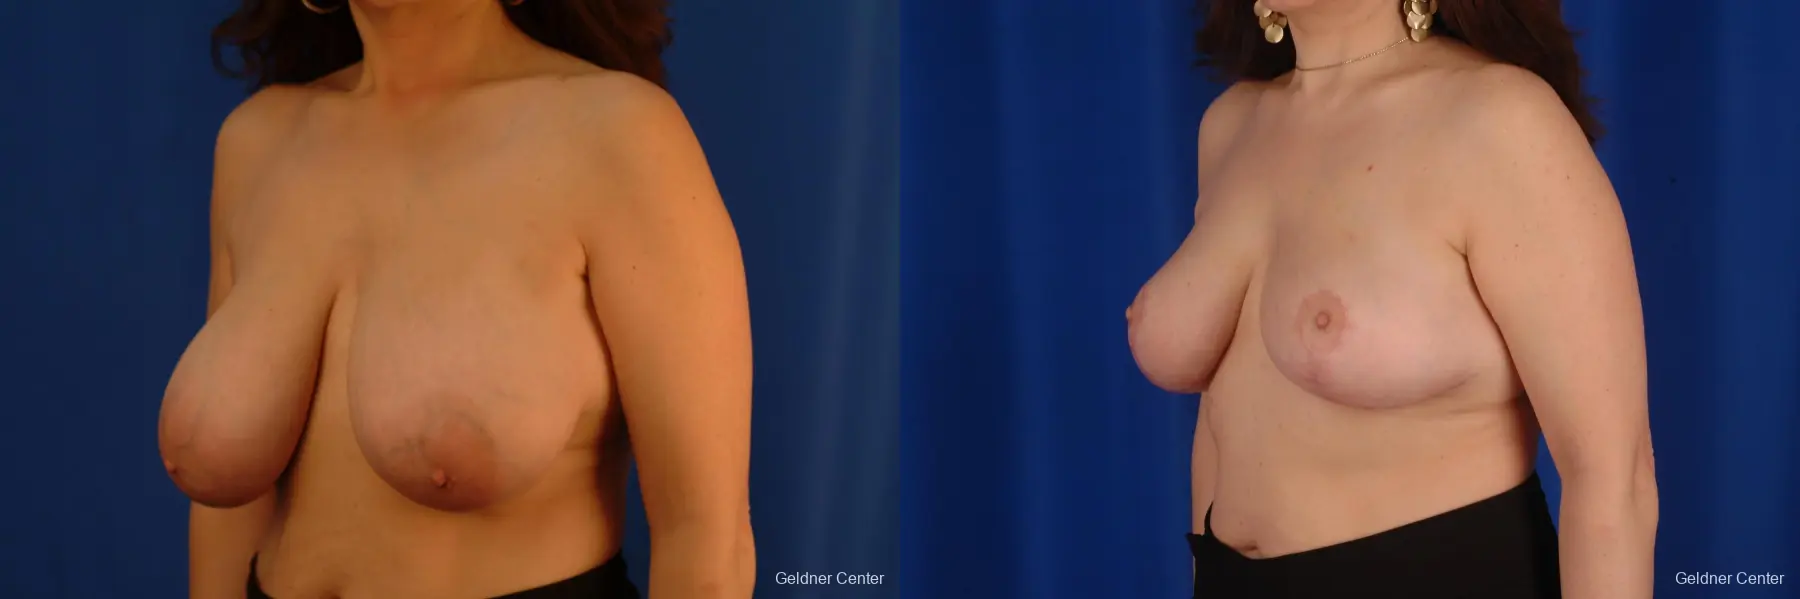 Breast Reduction Streeterville, Chicago 2289 - Before and After 4